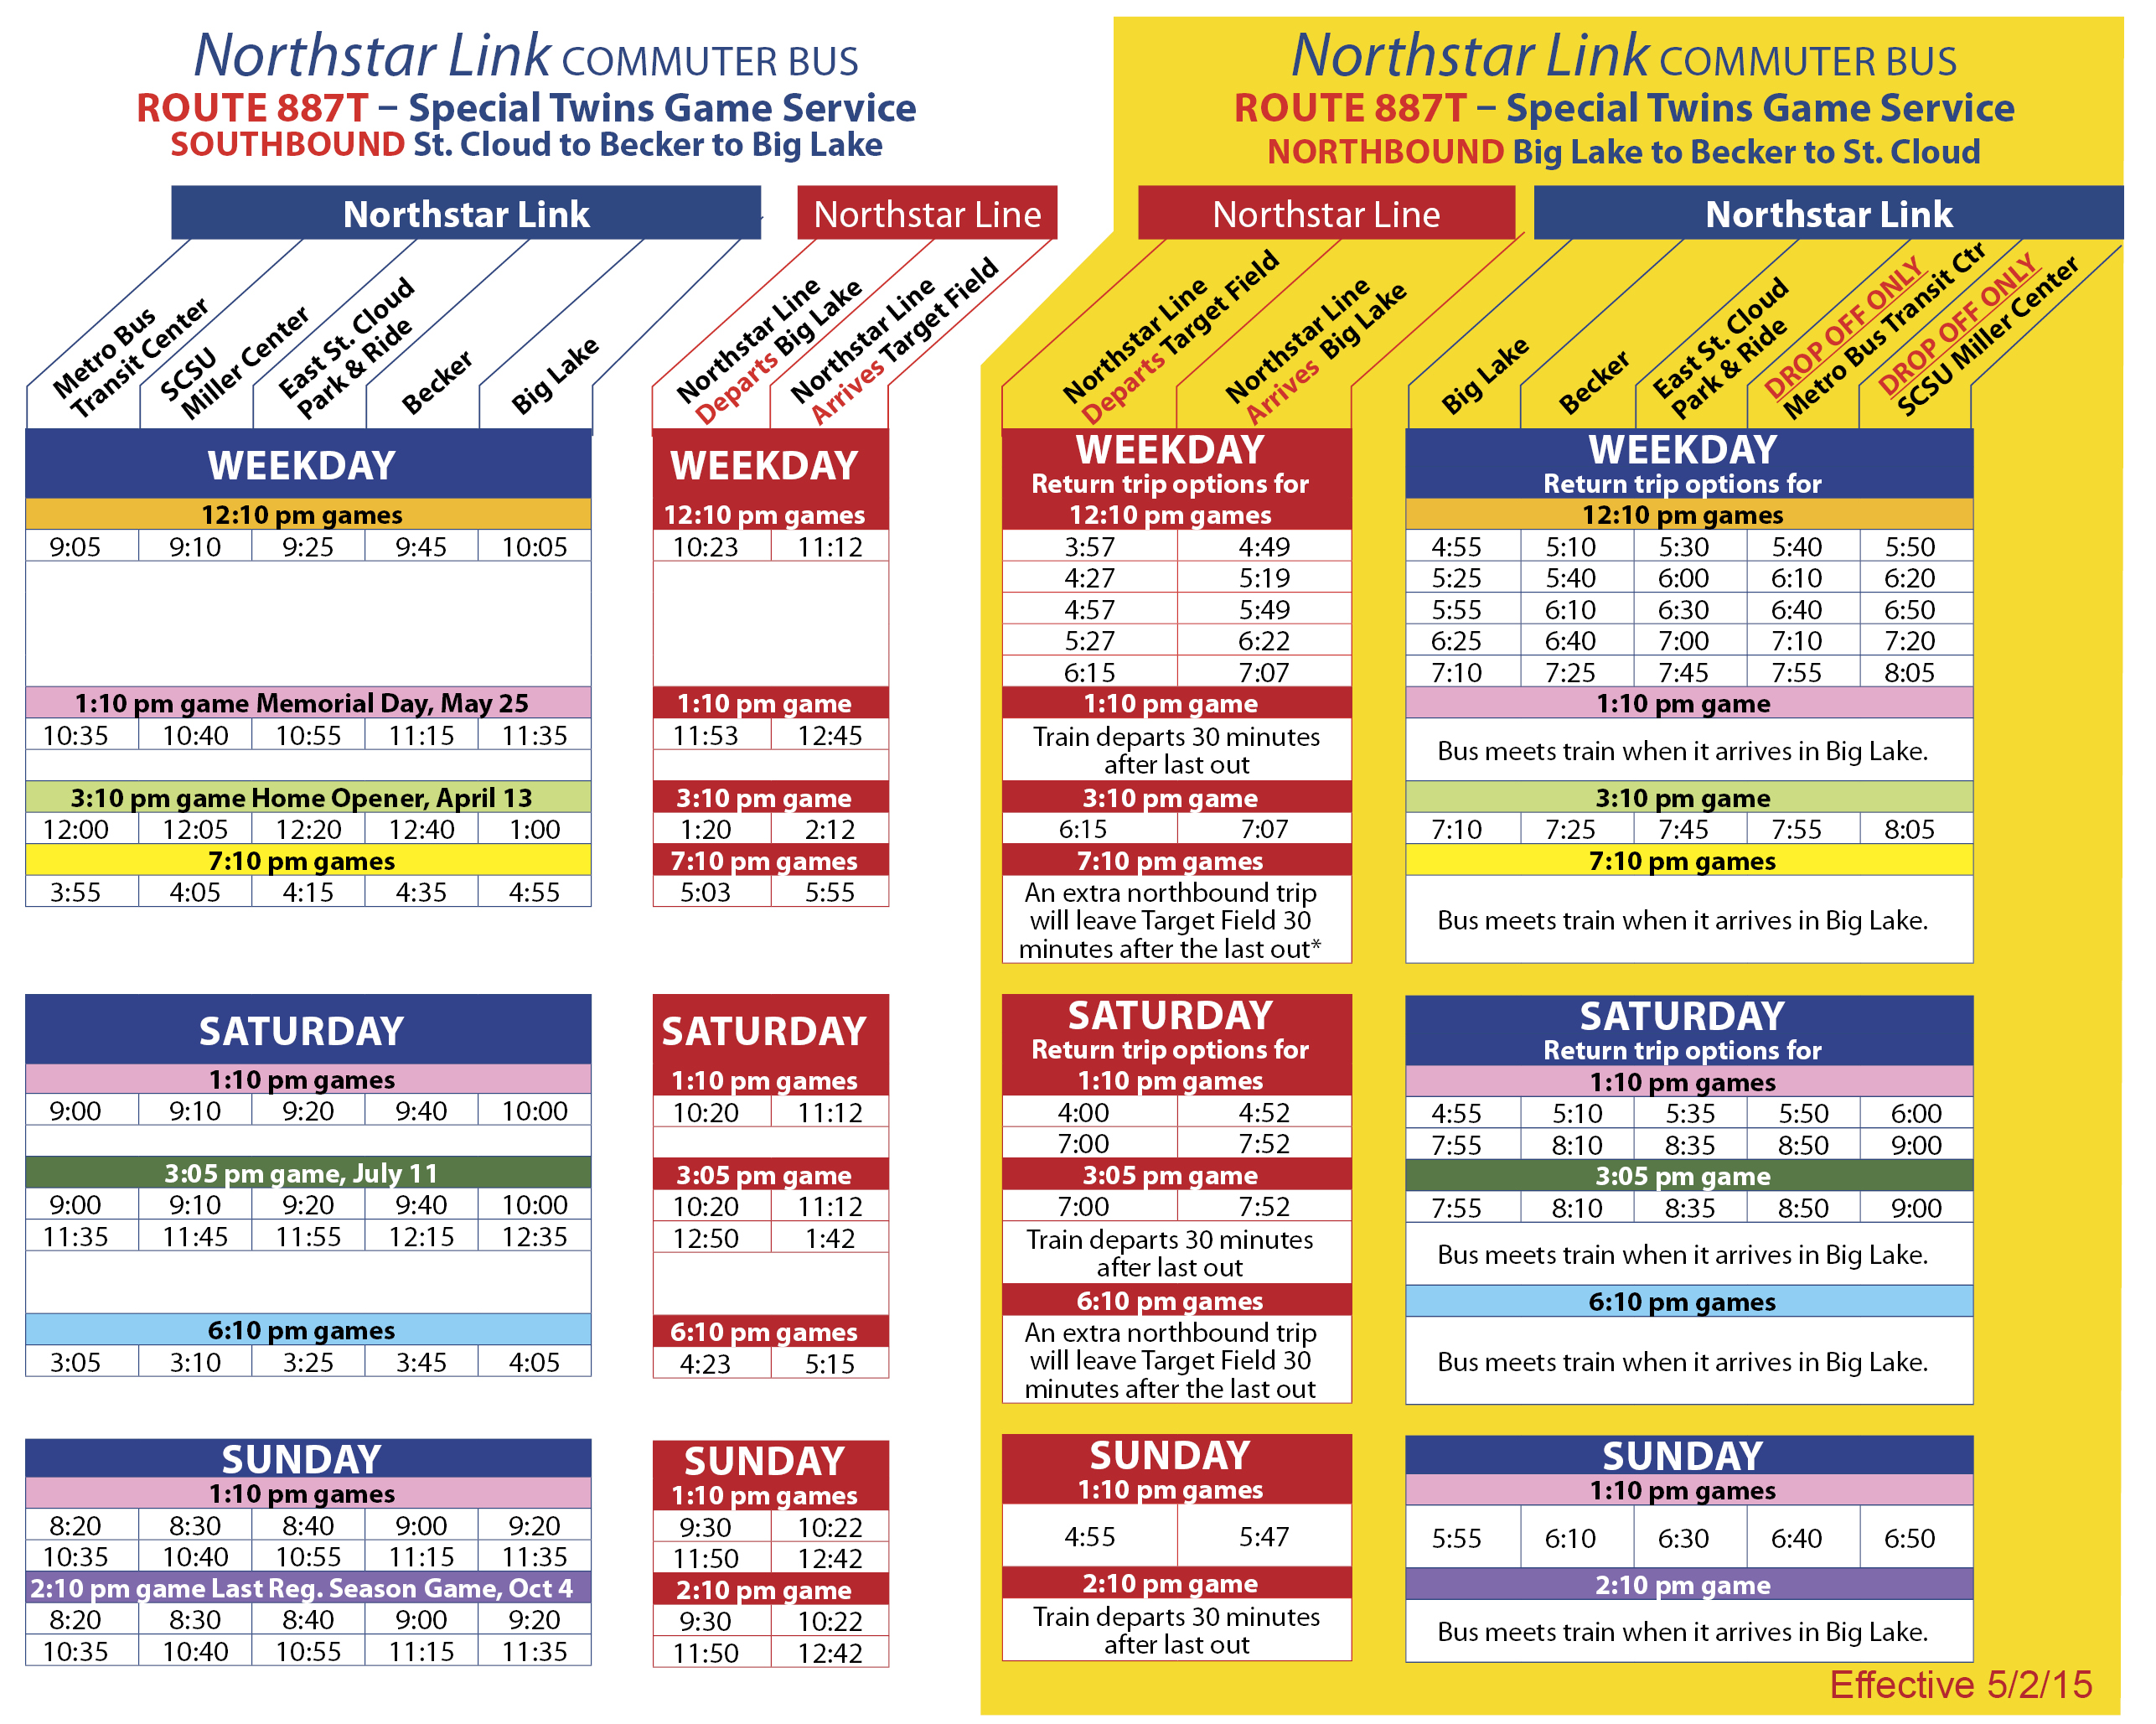 northstar link bus announces minor changes to 887 & 887t schedules